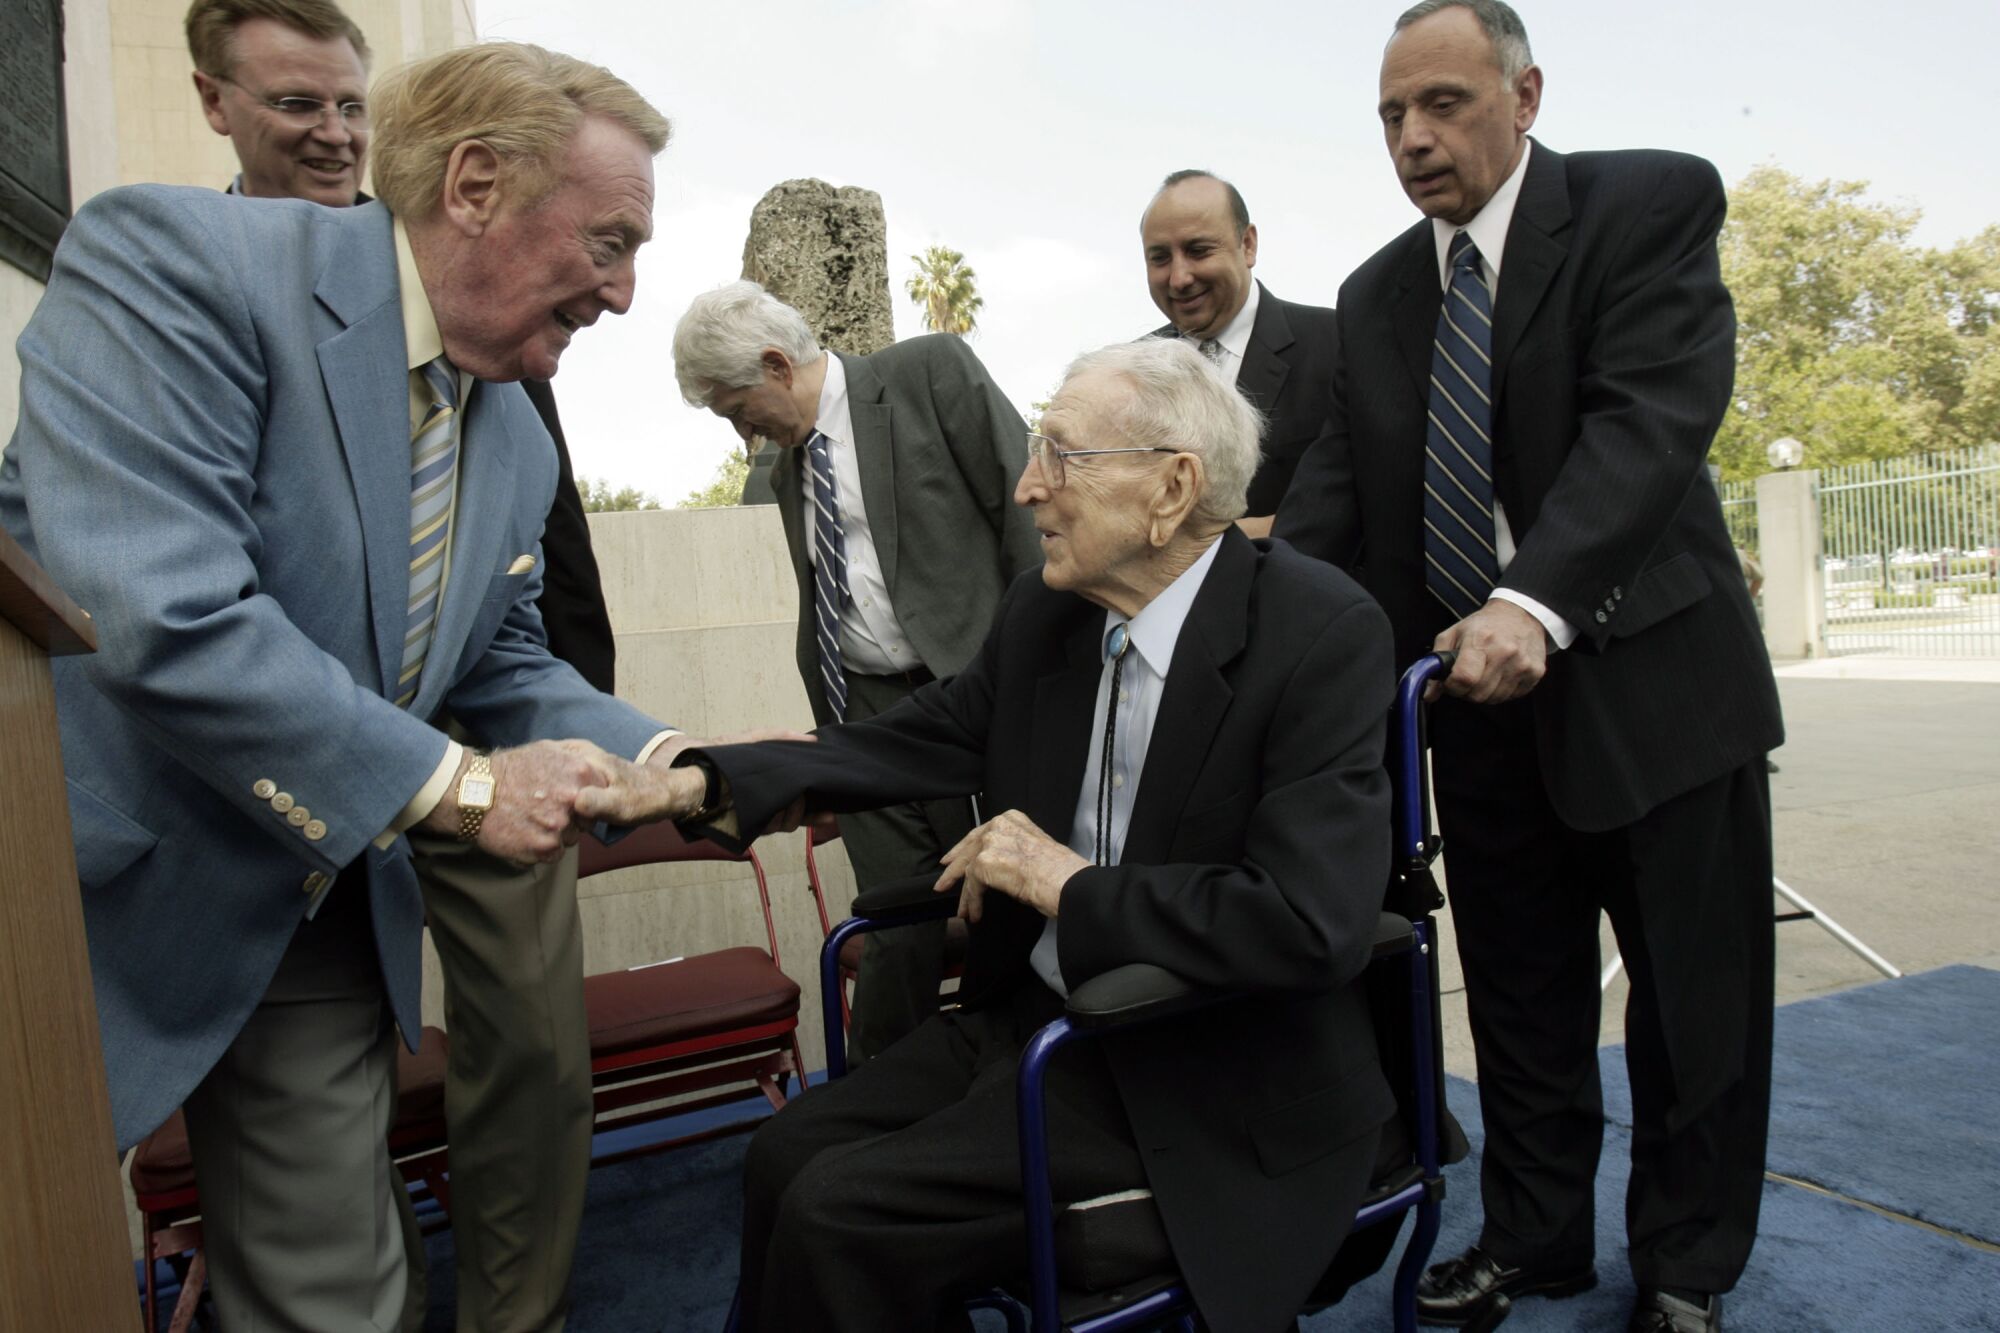 Former UCLA basketball coach John Wooden, center, is greeted by sportscaster Vin Scully at the Los Angeles Coliseum.